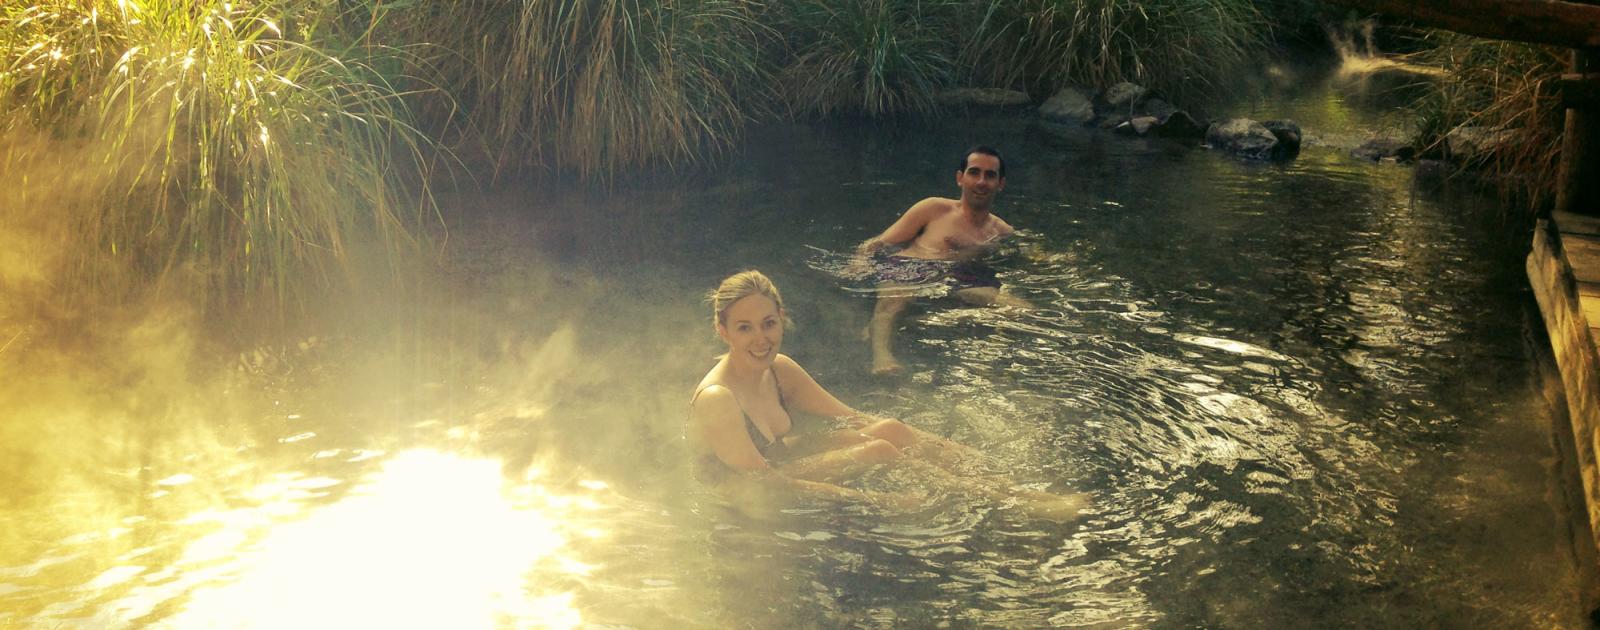 Soaking in natural hot wilderness pools 